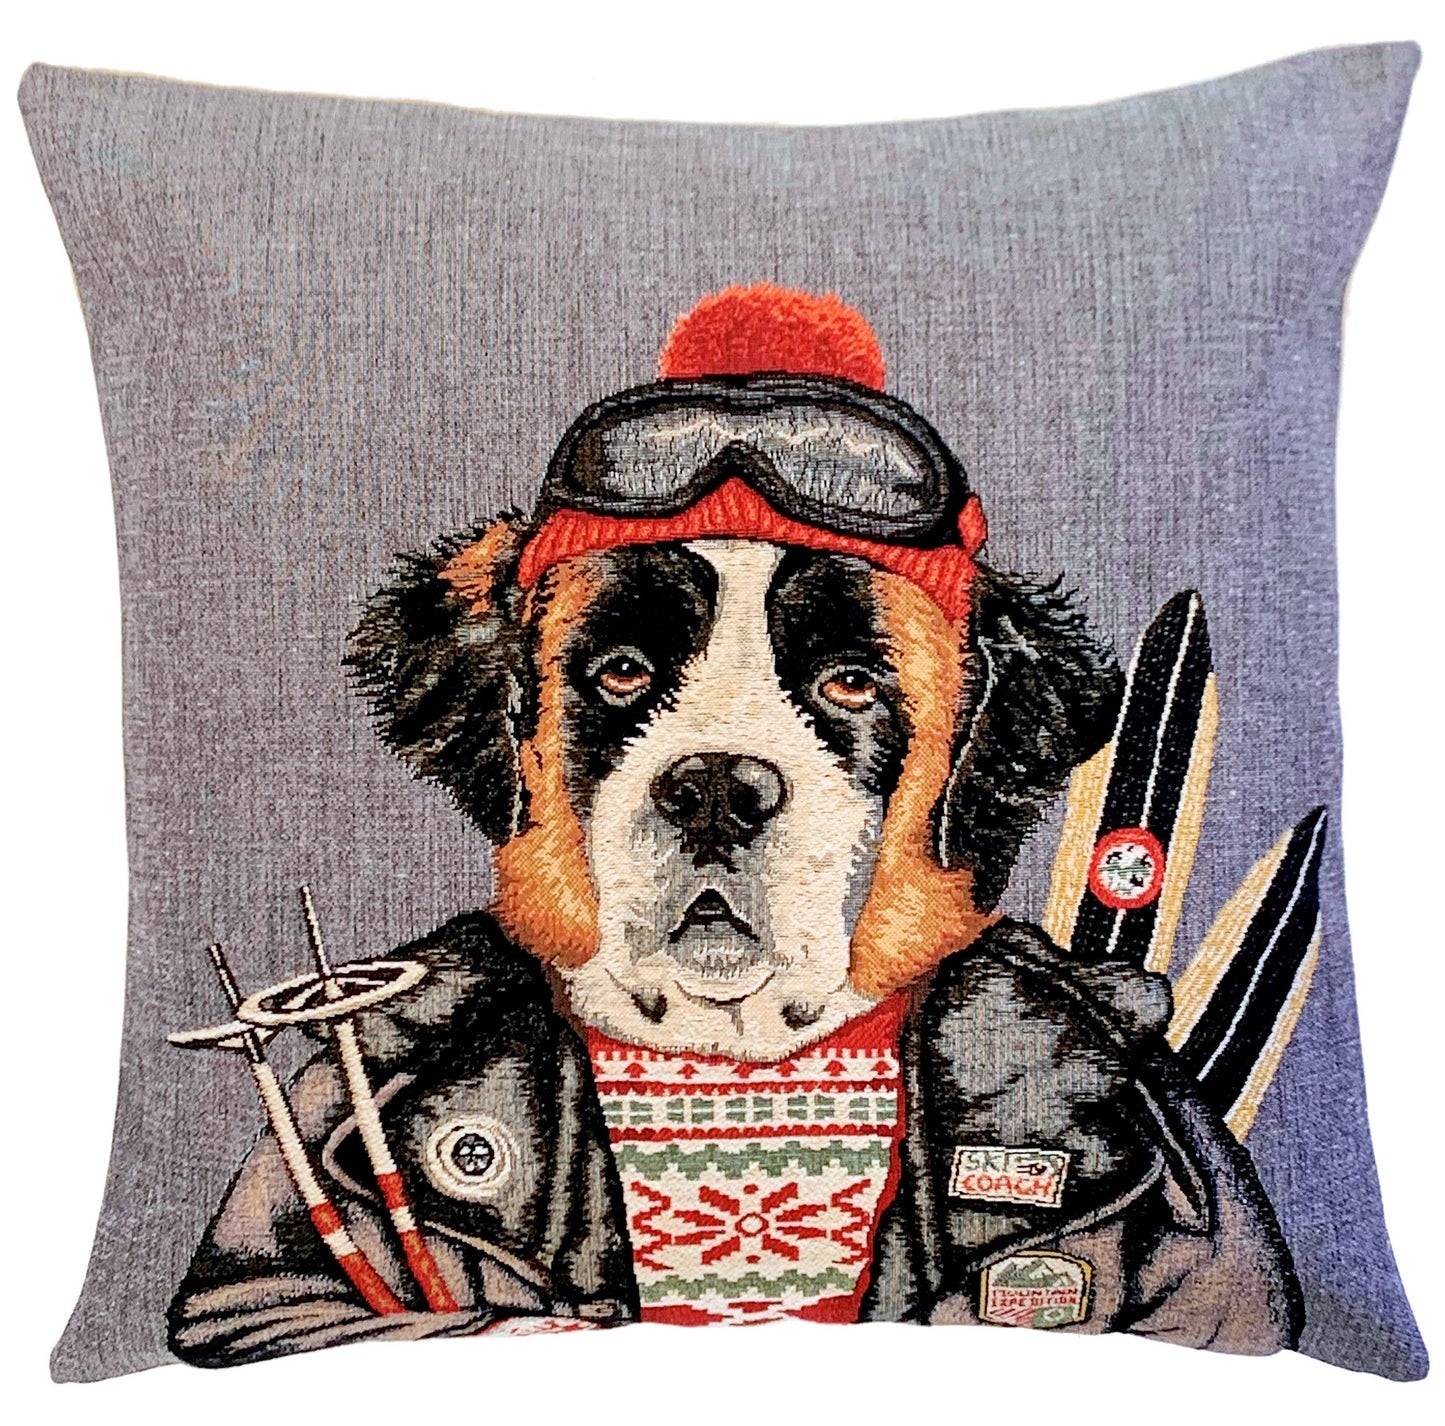 Nordic Decor - Alpine Gift - Bernese dog with skis: Stag